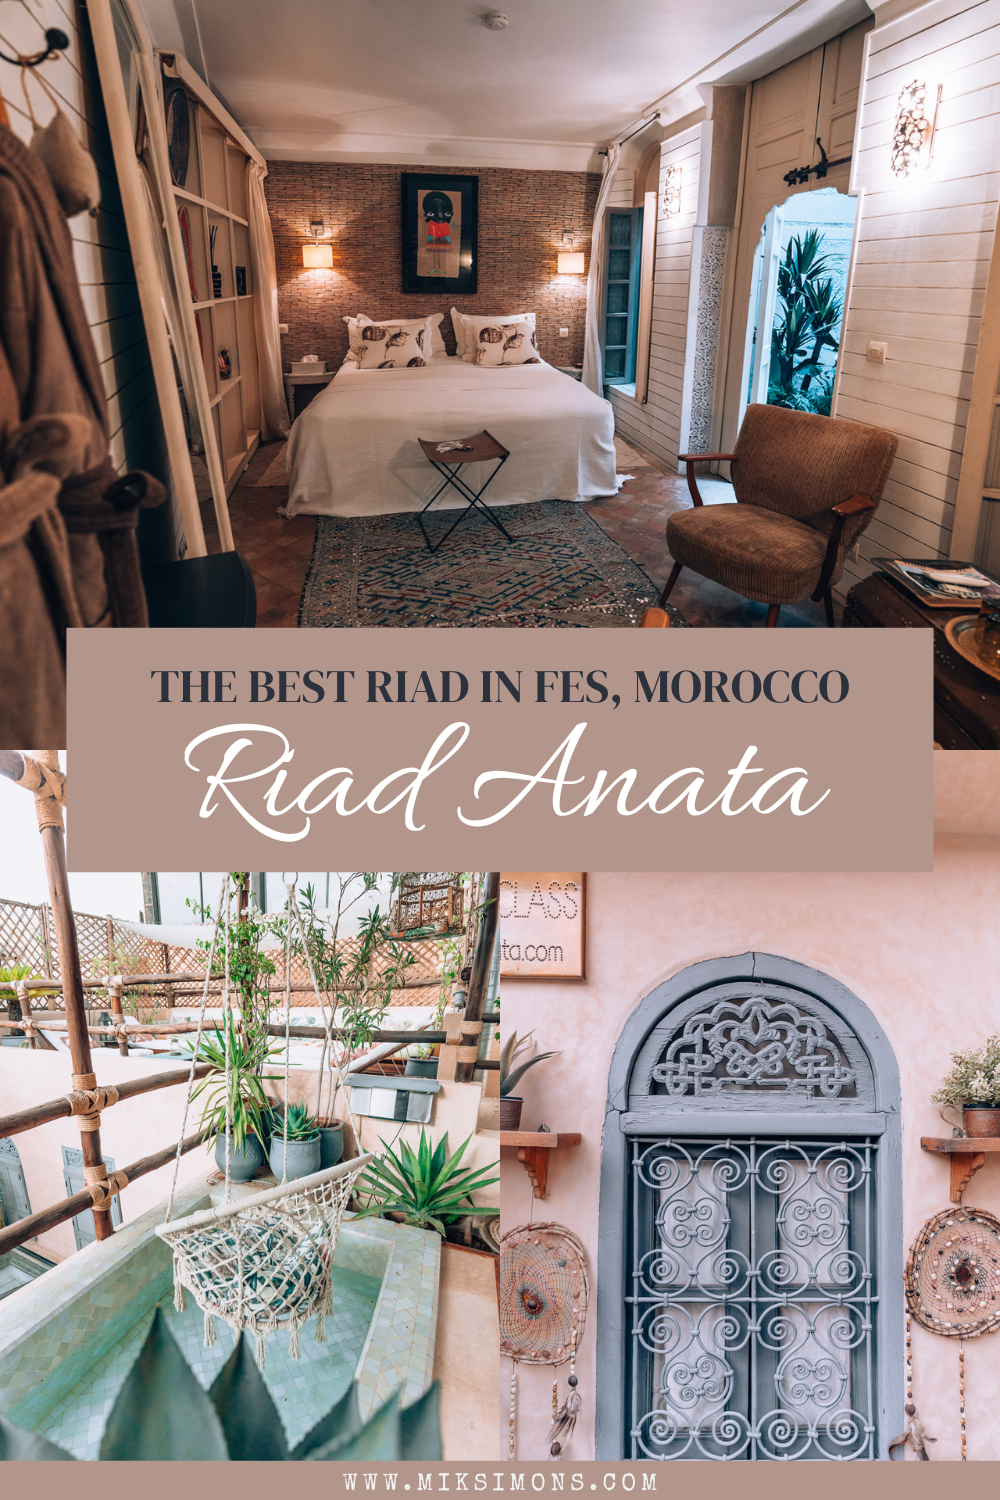 5 reasons to stay at the best riad in Fez, Riad Anata